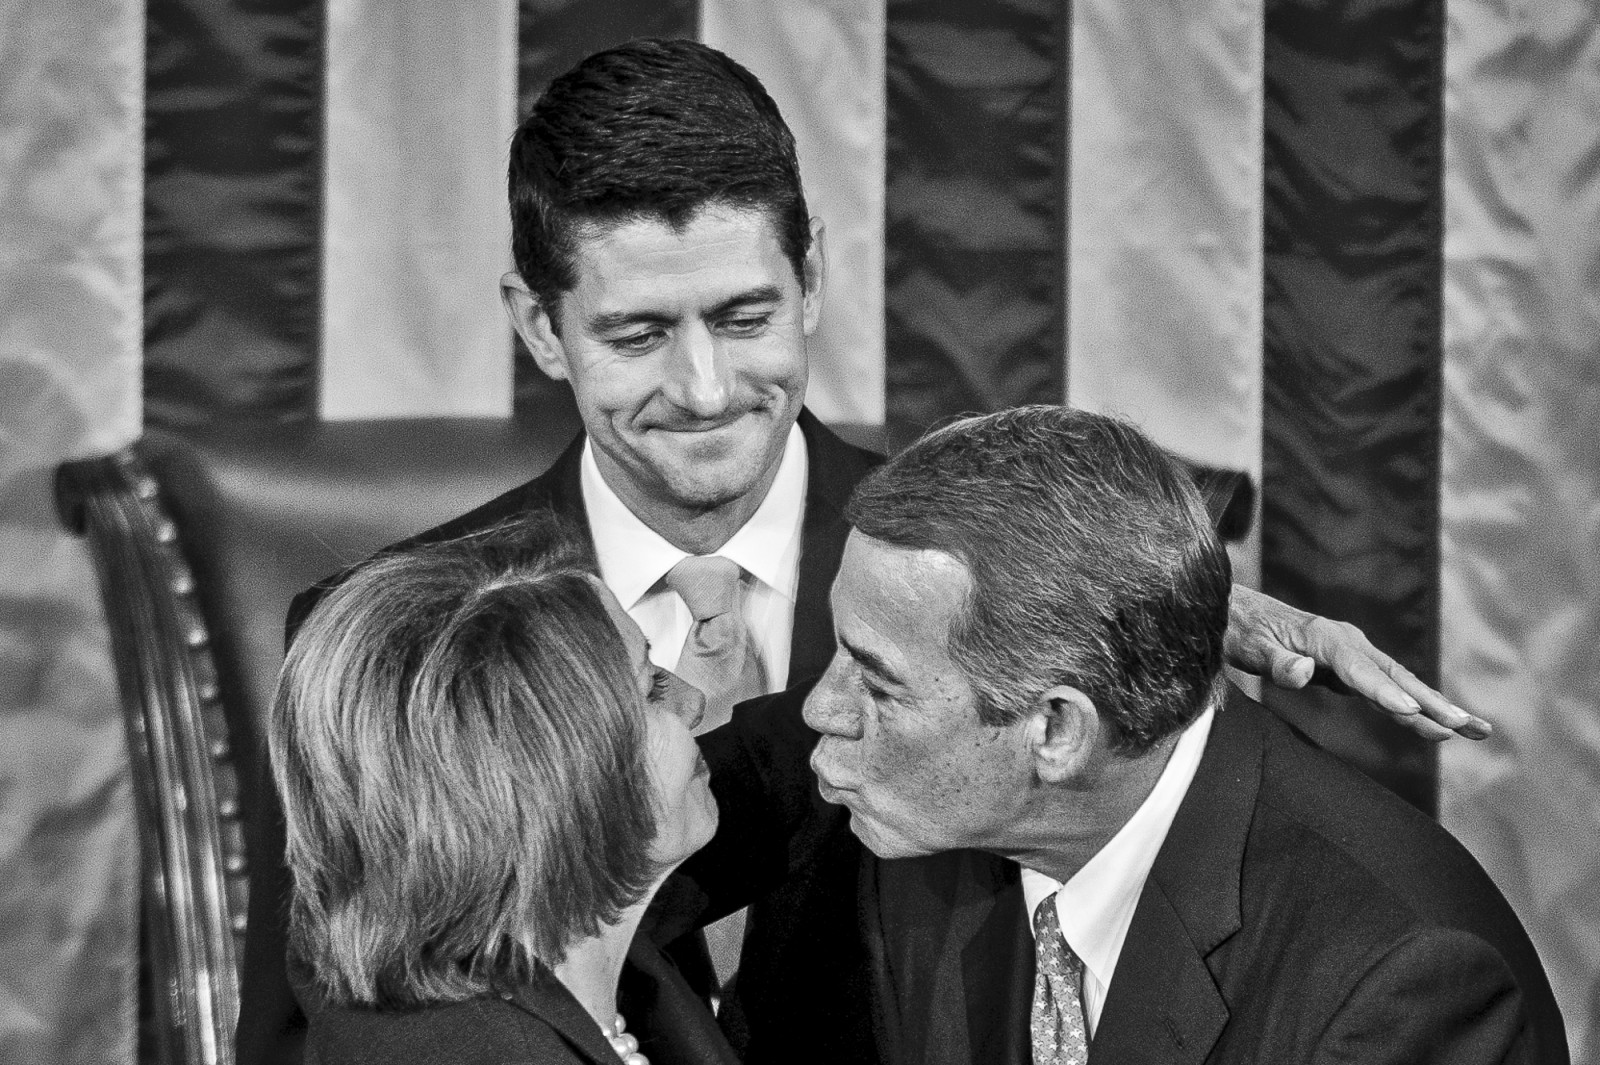 Speaker elect Paul Ryan (R-WI) looks on as Speaker John Boehner (R-OH) leans in to kiss Democratic Minority Leader Nancy Pelosi as he leaves the chair for the final time on October 29, 2015 in Washington, D.C. Earlier the outgoing Speaker, Rep. John Boehner (R-OH), gave his farewell address to Congress. He is retiring on October 30, 2015. Photo by Pete Marovich/UPI